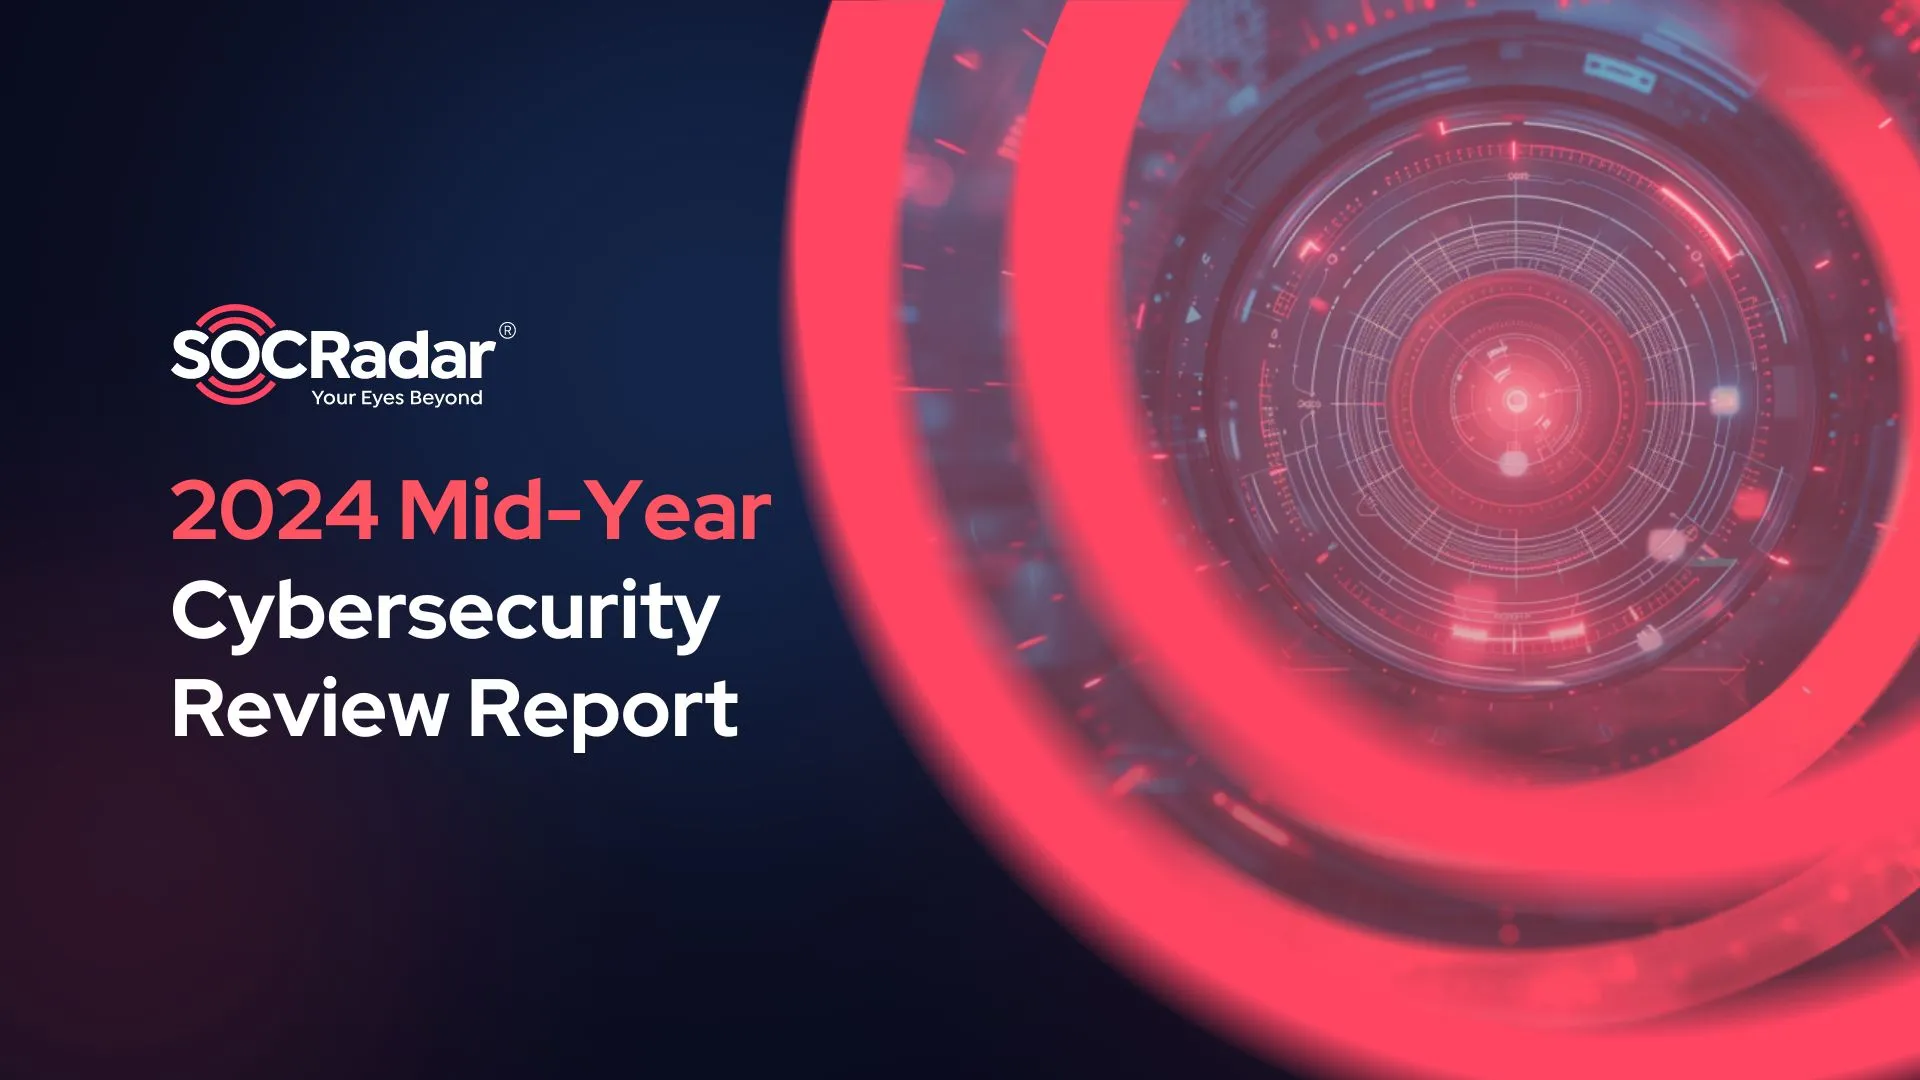 SOCRadar® Cyber Intelligence Inc. | The 2024 Mid-Year Cybersecurity Review Report